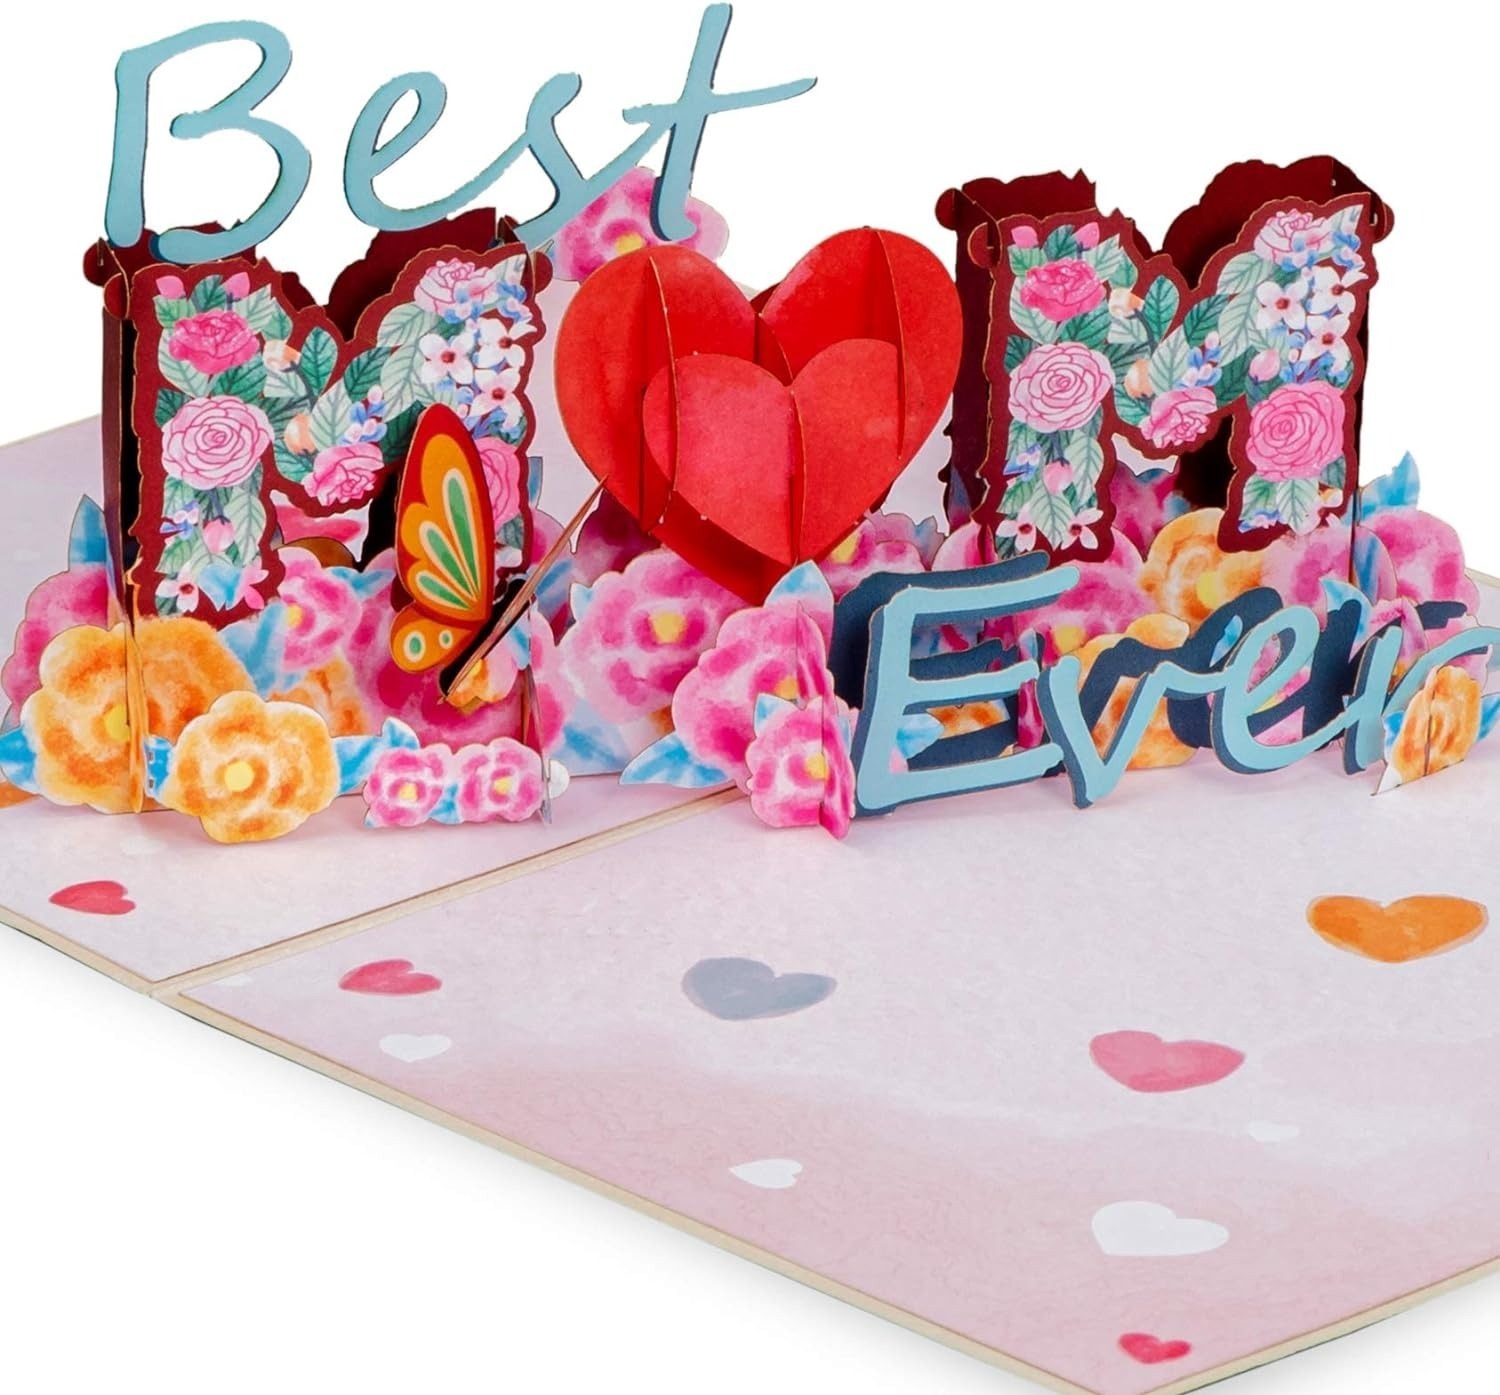 PaperLove Mother's Day Pop-Up 3D Greeting Card (Various designs) $11.19 -$15.99 + Free Shipping w/ Prime or $35+